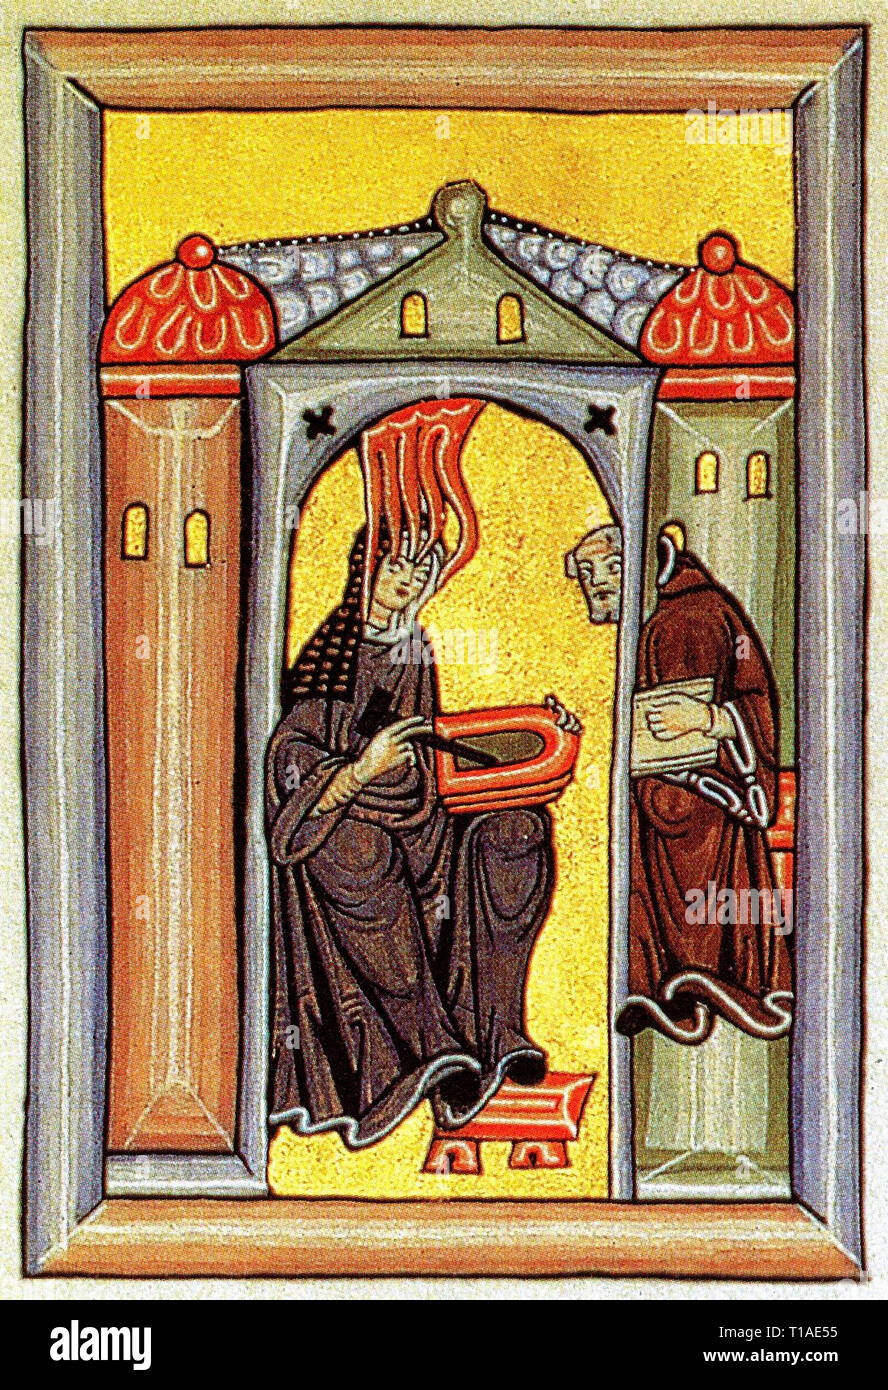 Hildegard von Bingen receives a divine inspiration and passes it on to her scribe. Stock Photo